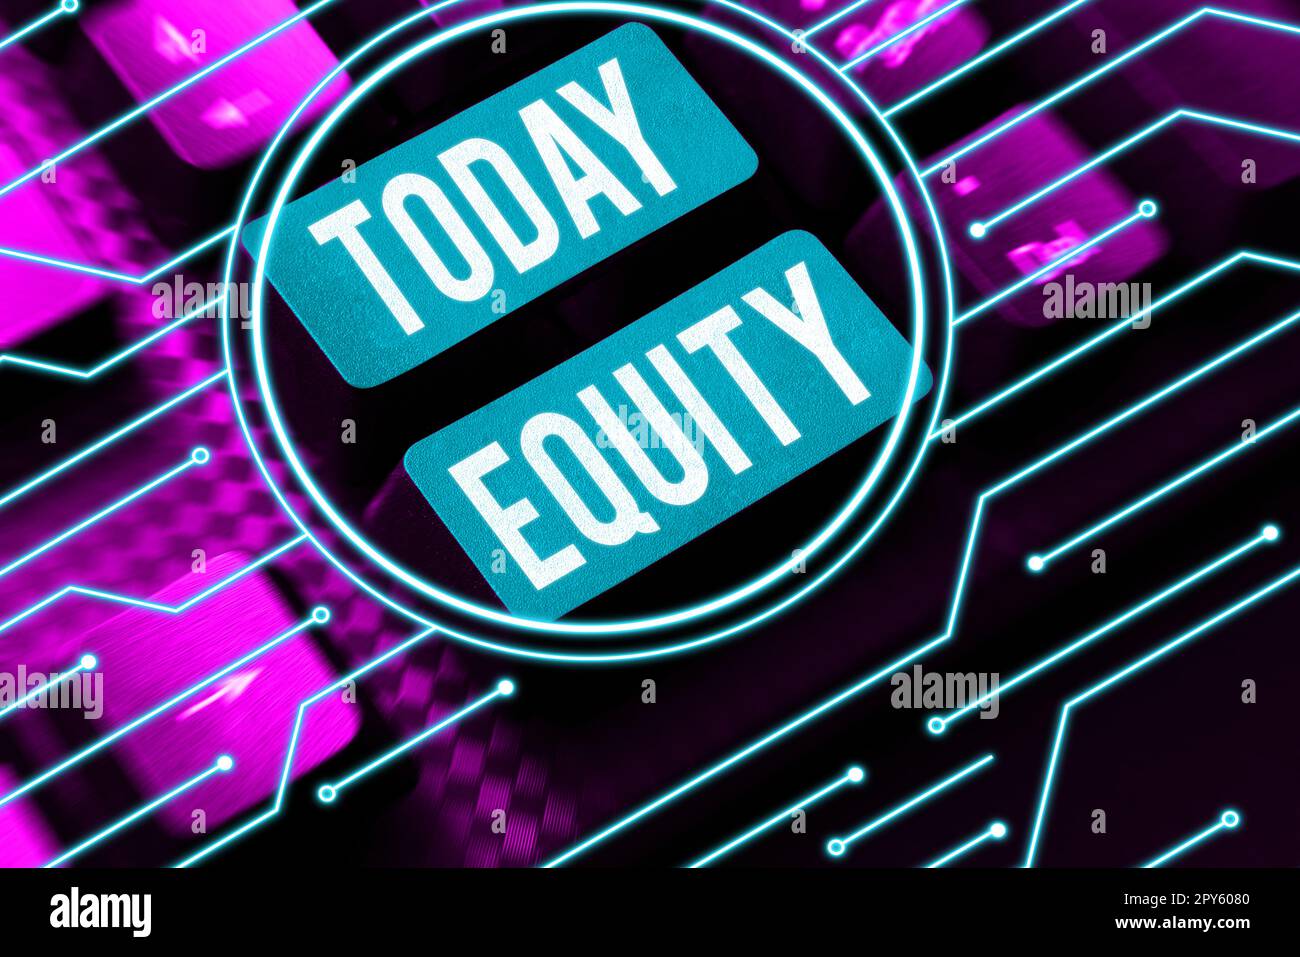 Writing displaying text Equity. Business idea quality of being fair and impartial race free One hand Unity Stock Photo